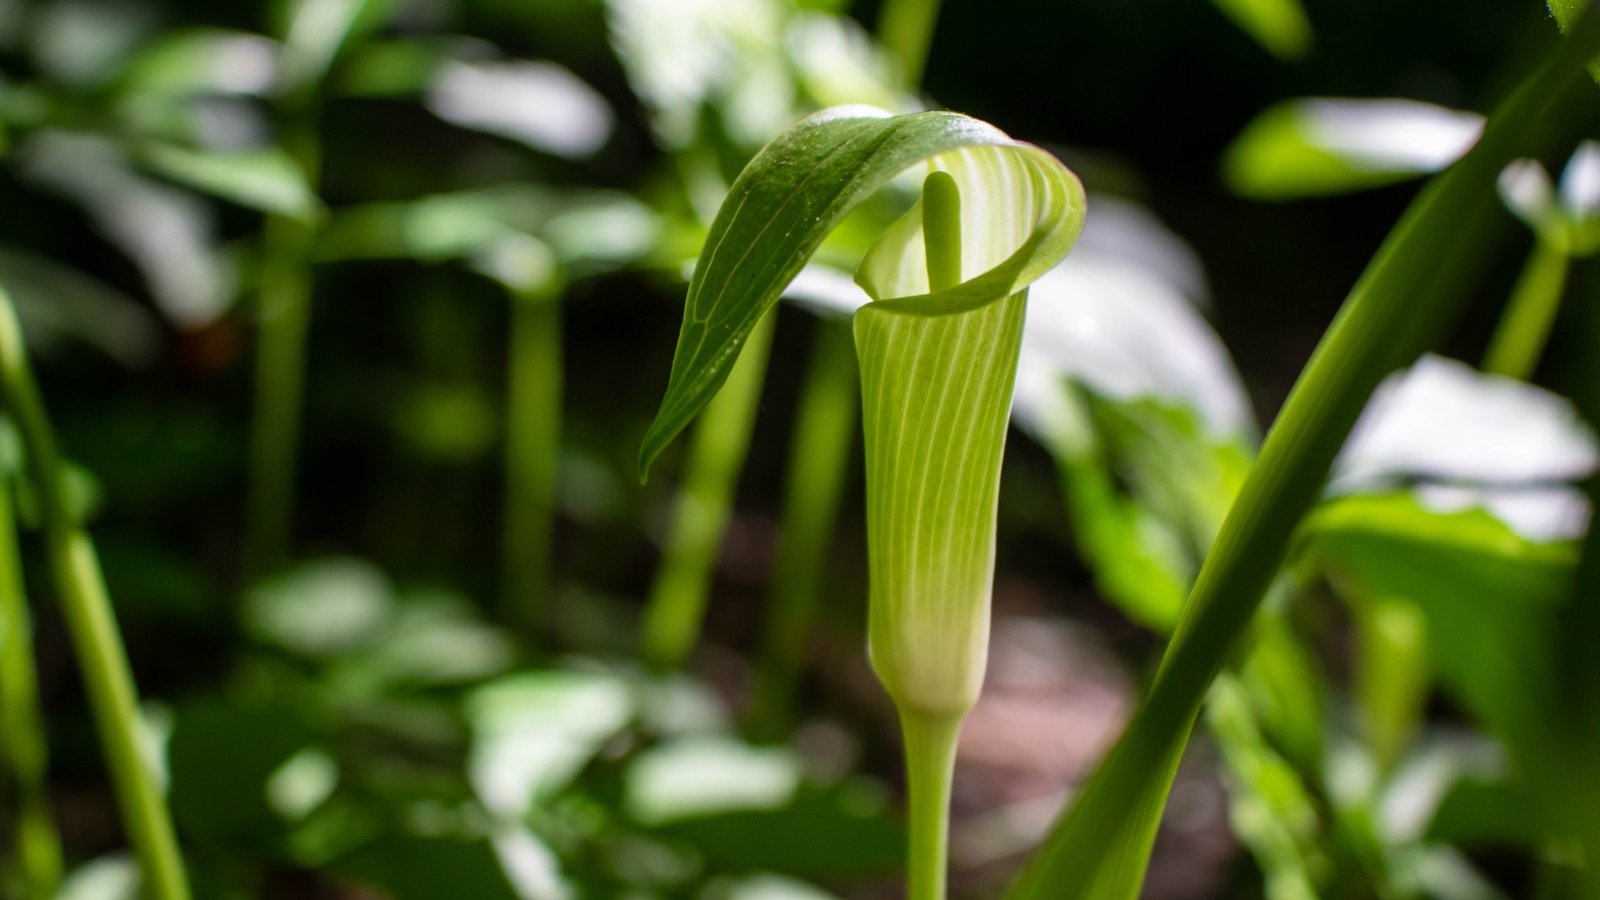 The Arisaema triphyllum ‘Mrs. French’ features a distinctive, elegantly striped green and white spathe that arches over a pale spadix, complemented by large, glossy, trifoliate leaves.